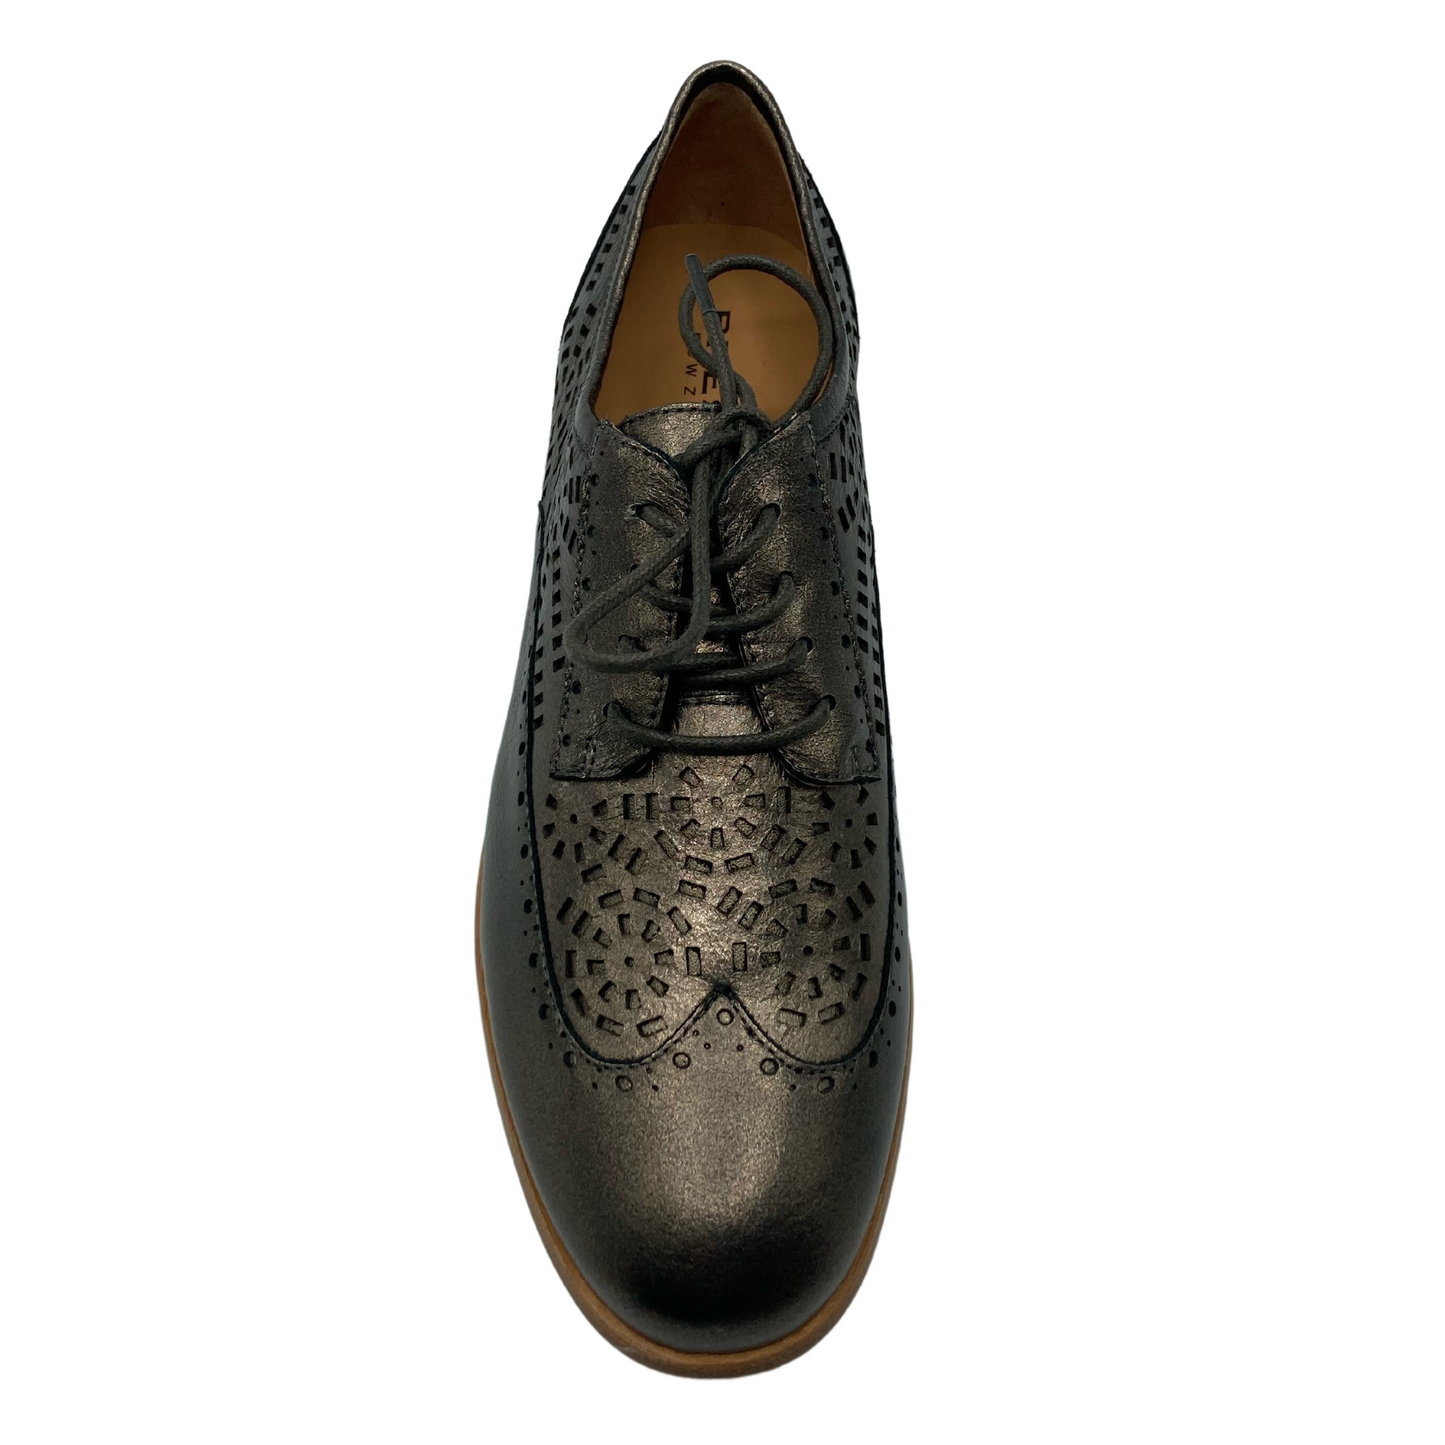 Top view of leather shoe with matching laces and light brown inner leather lining